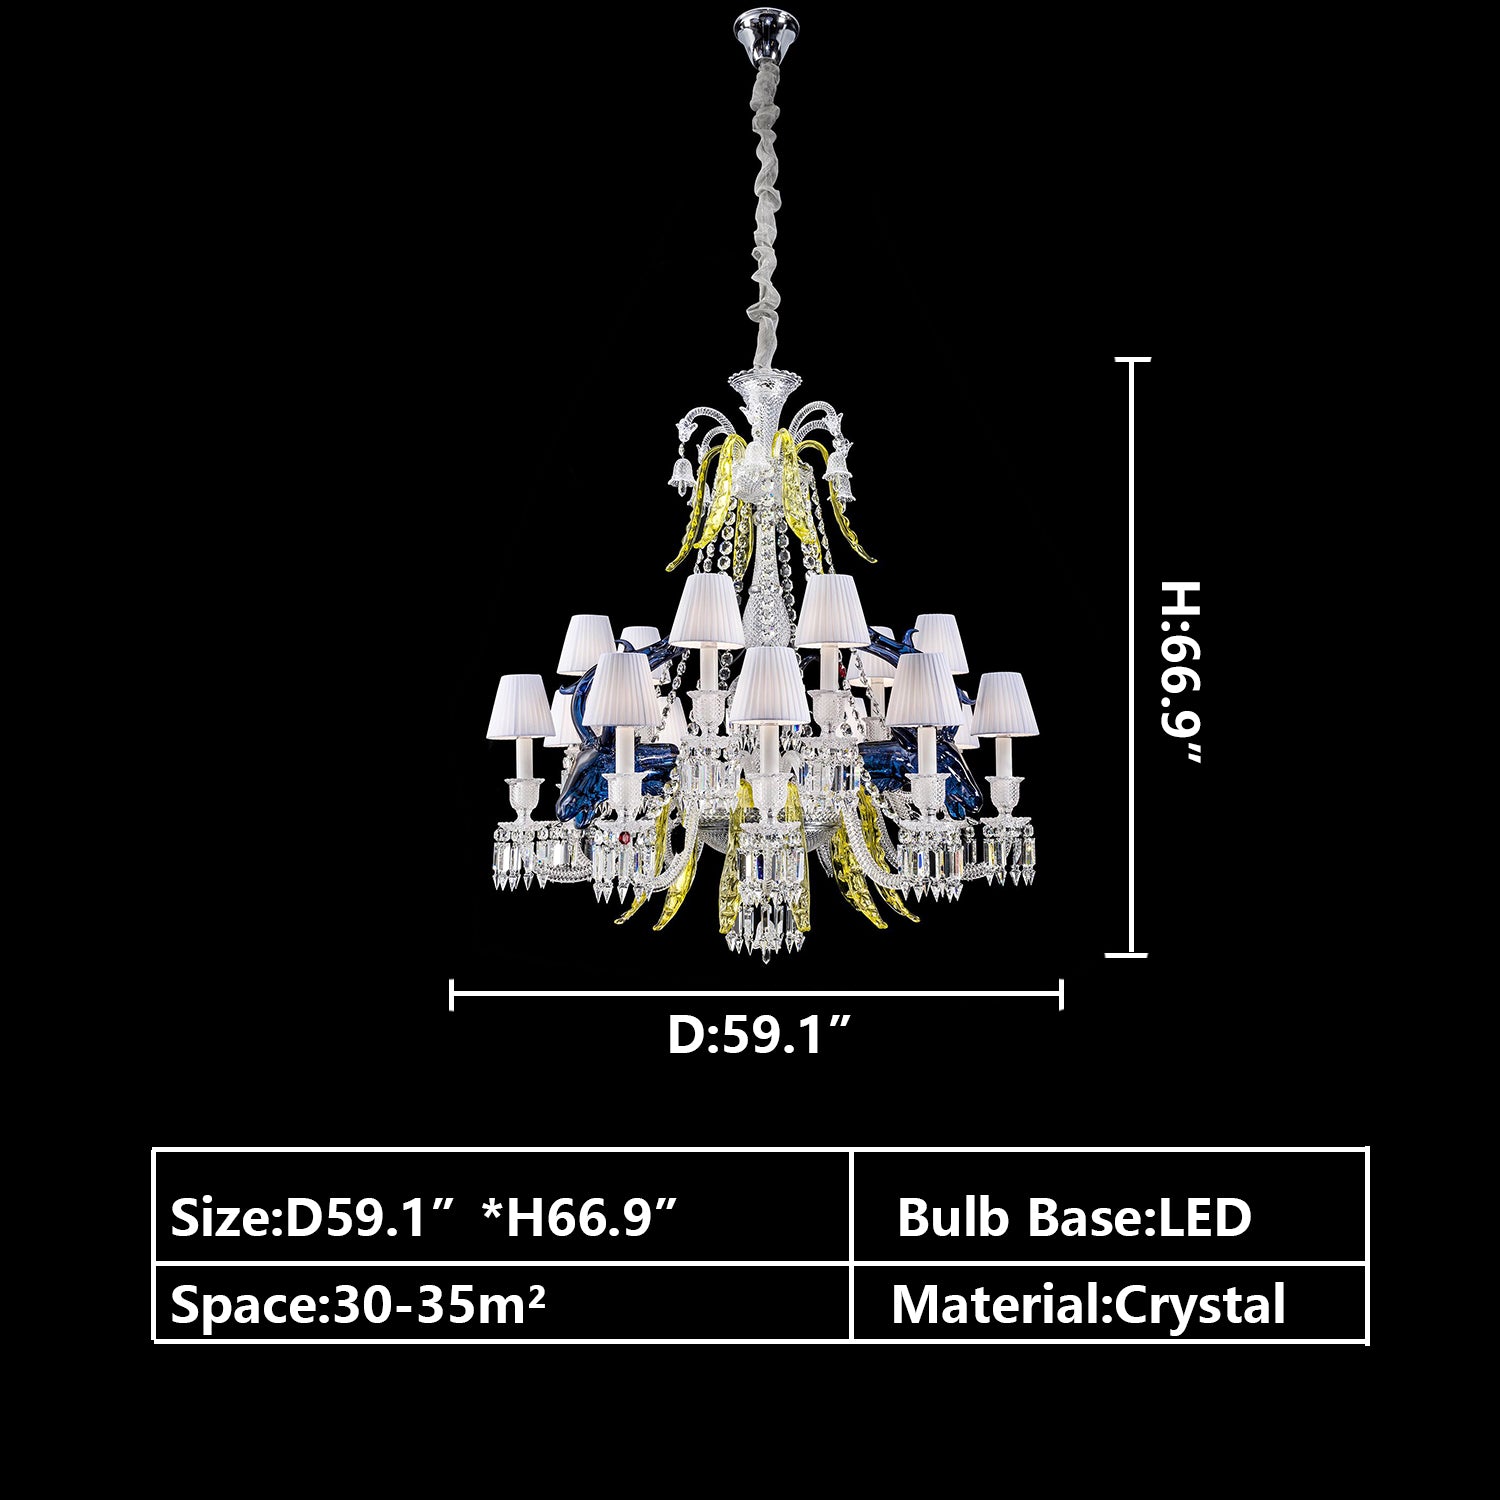 D59.1"*H66.9" chandelier,chandeliers,pendant,crystal,metal,glass,colorful,stained,yellow,blue,candle,glass shade,red,oversized,large,huge,big,luxury,living room,dining room,foyer,entrys,hallway,loft,stairs